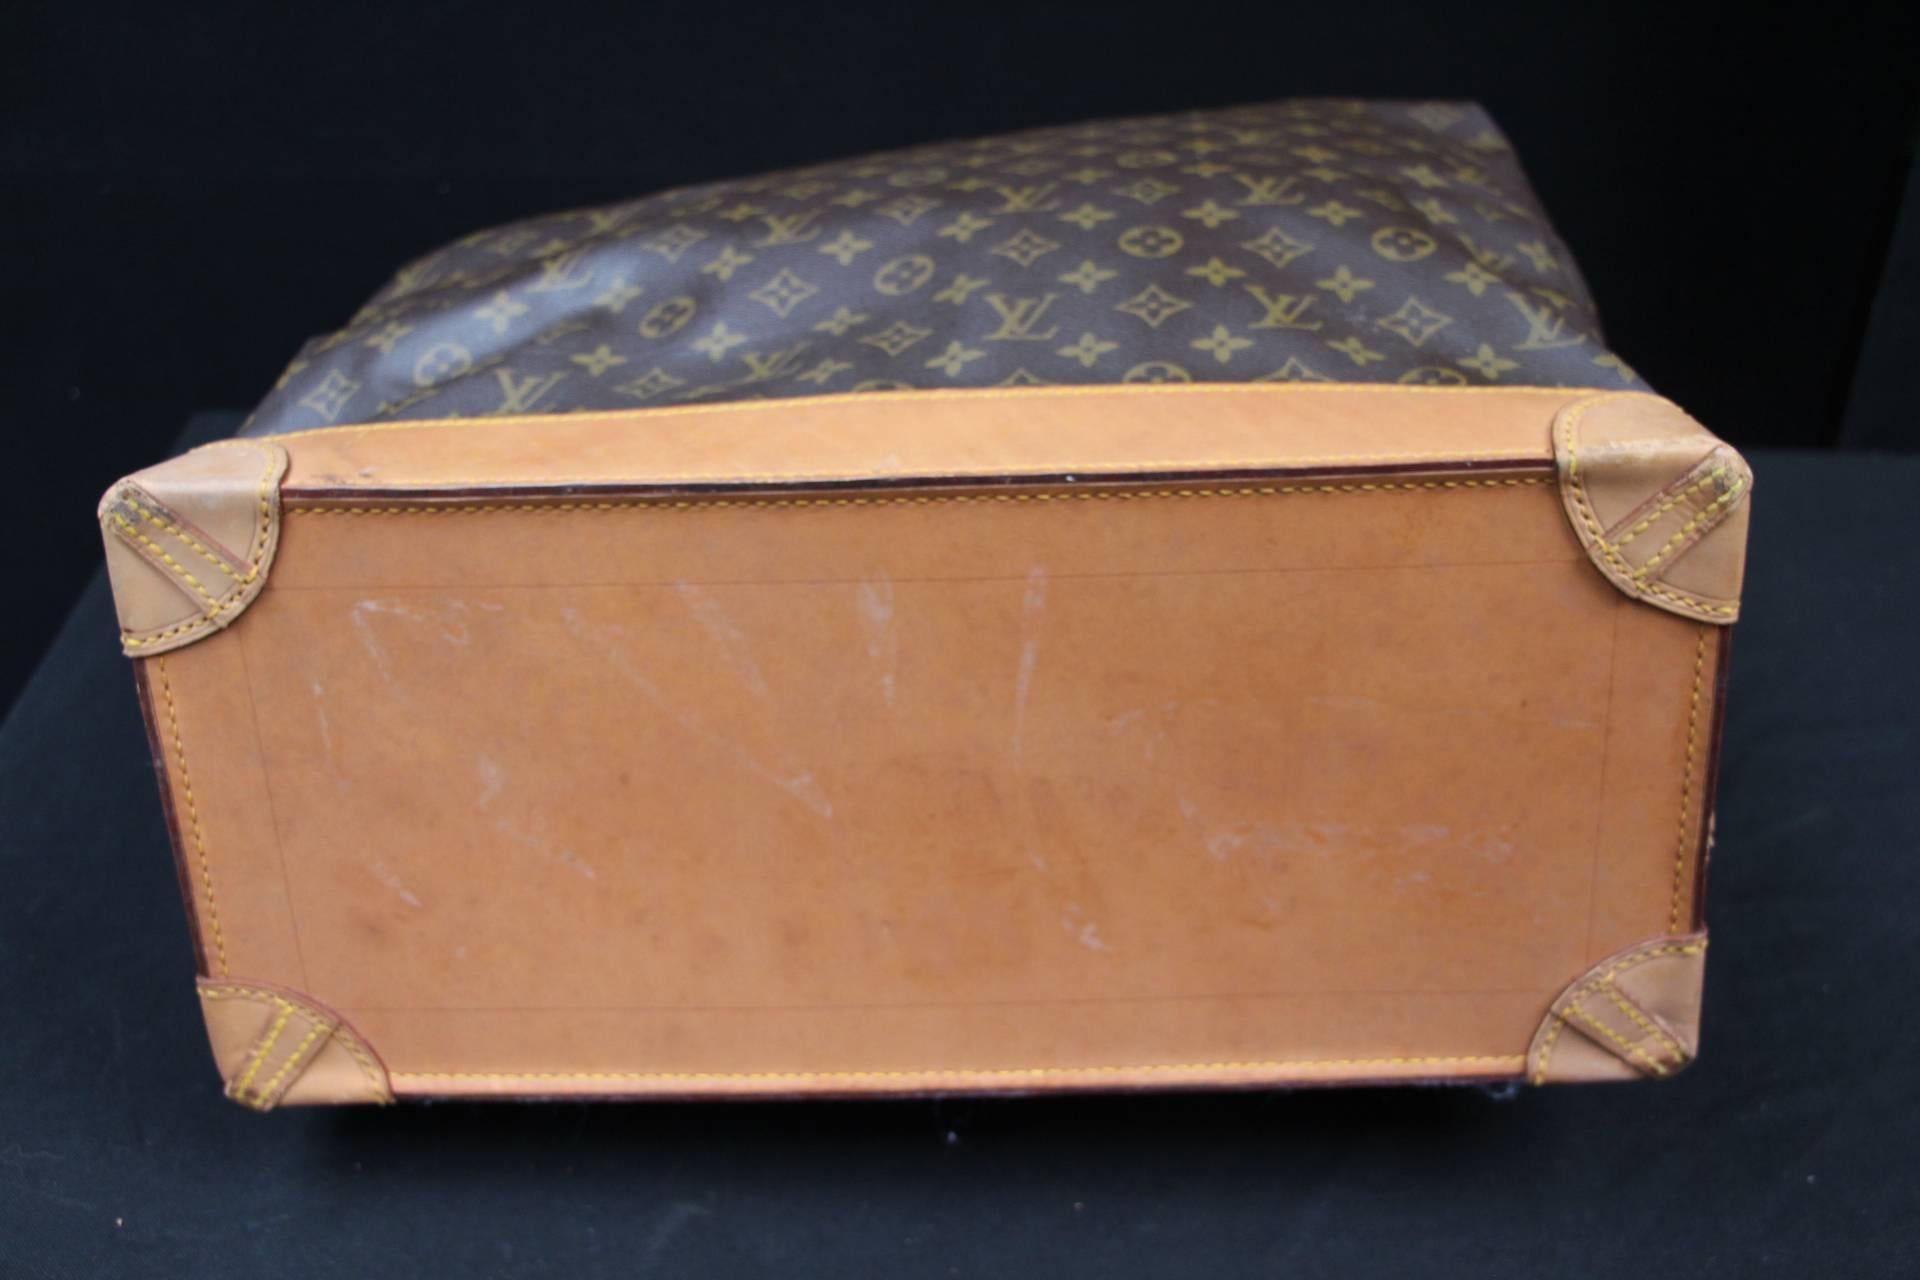 Beautiful Louis Vuitton monogram canvas.
Leather has got a very nice patina. No scratches. Slight stains.
Its interior is in very good condition, no stain and no smell.